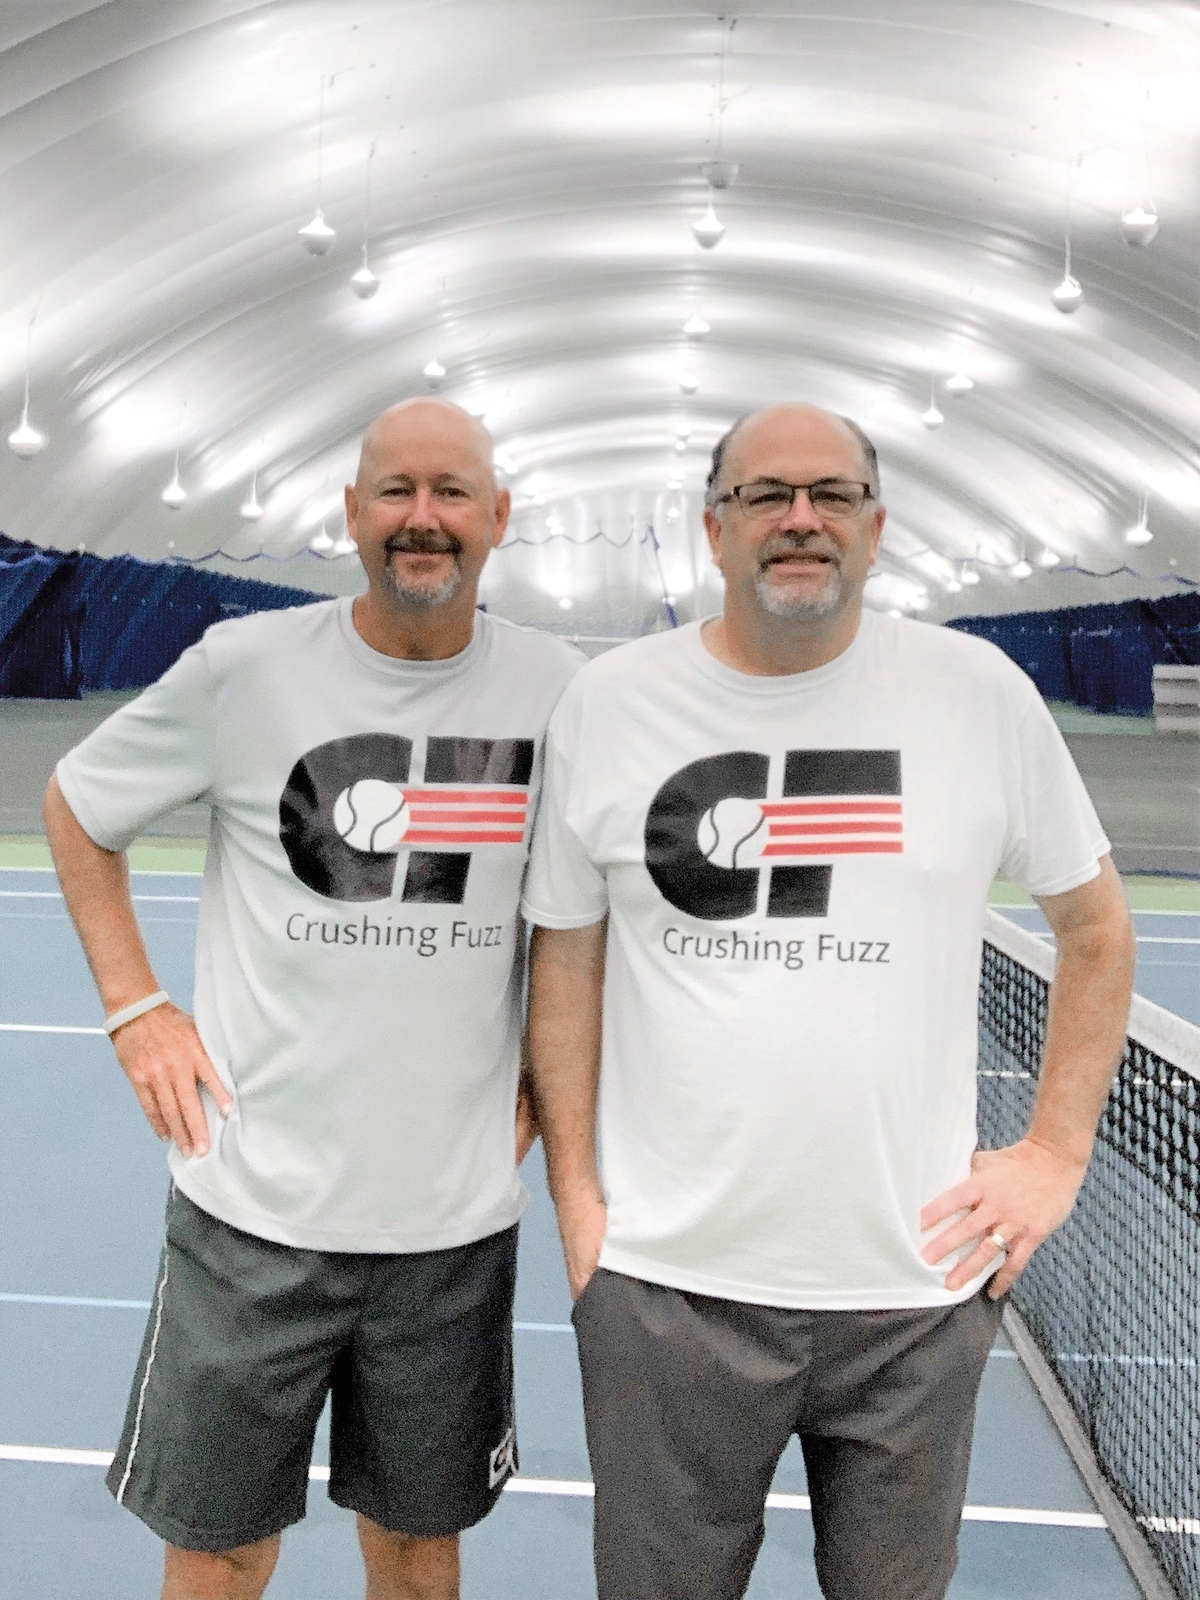 Sun City resident and tennis pro Mike Grantham (left) will be joined by other pros, such as Mark Exner (right) at the tennis club this year to teach lessons and encourage fellowship. (Photo by Christine Such/My Sun Day News)